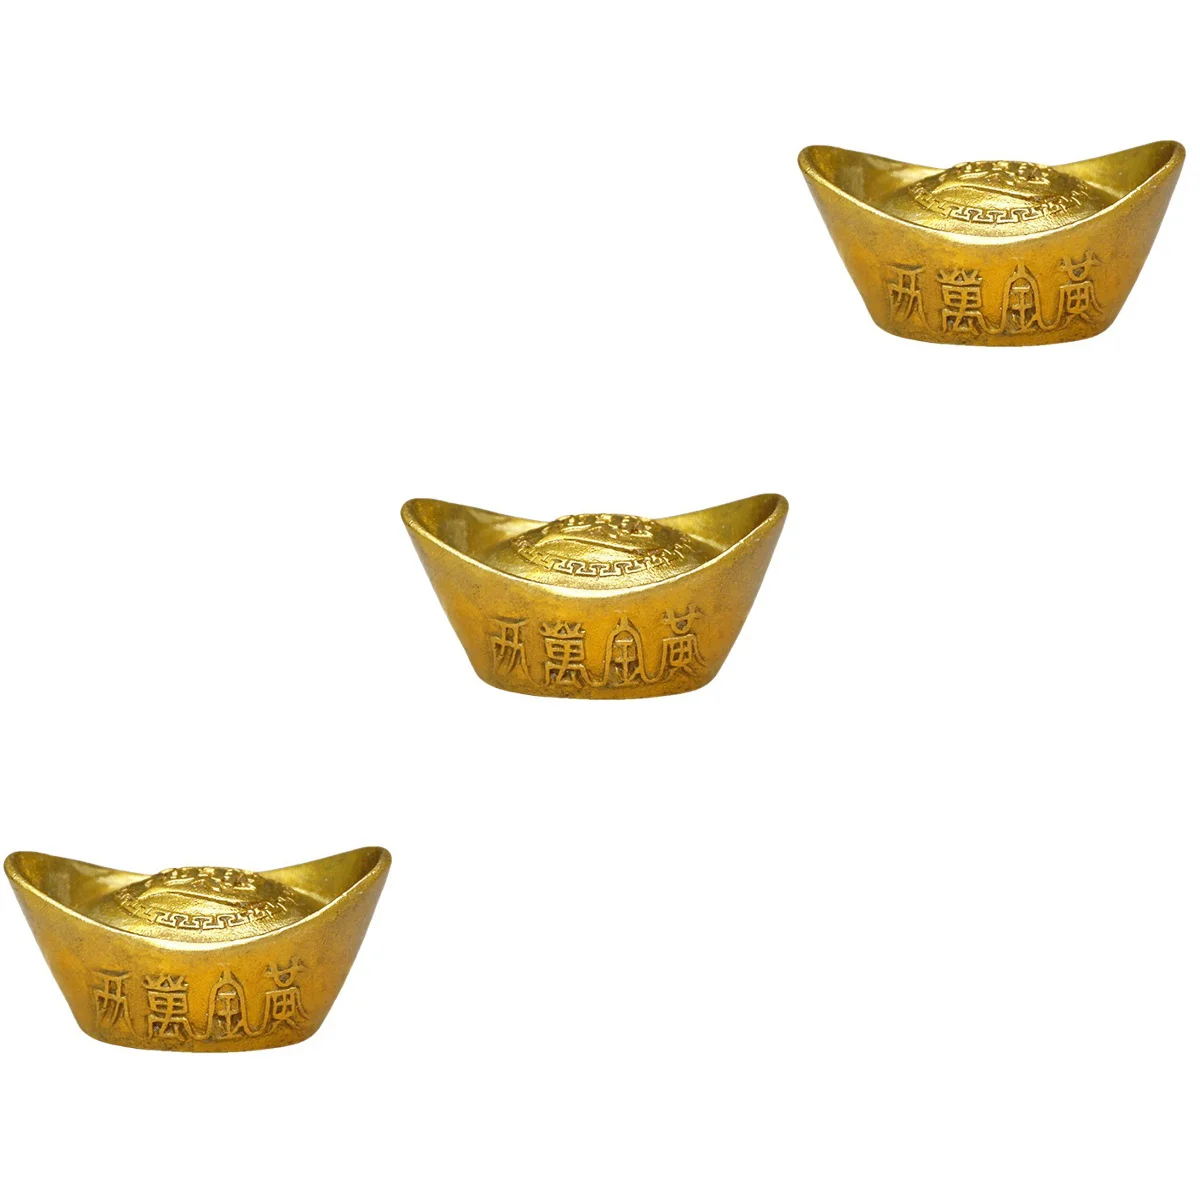 

Ingot Ingots Wealth Money Lucky Chinese Gold Decor Luck Golden Bao Yuan Simulated Tone Shui Feng Ancient Home Fortune Prosperity